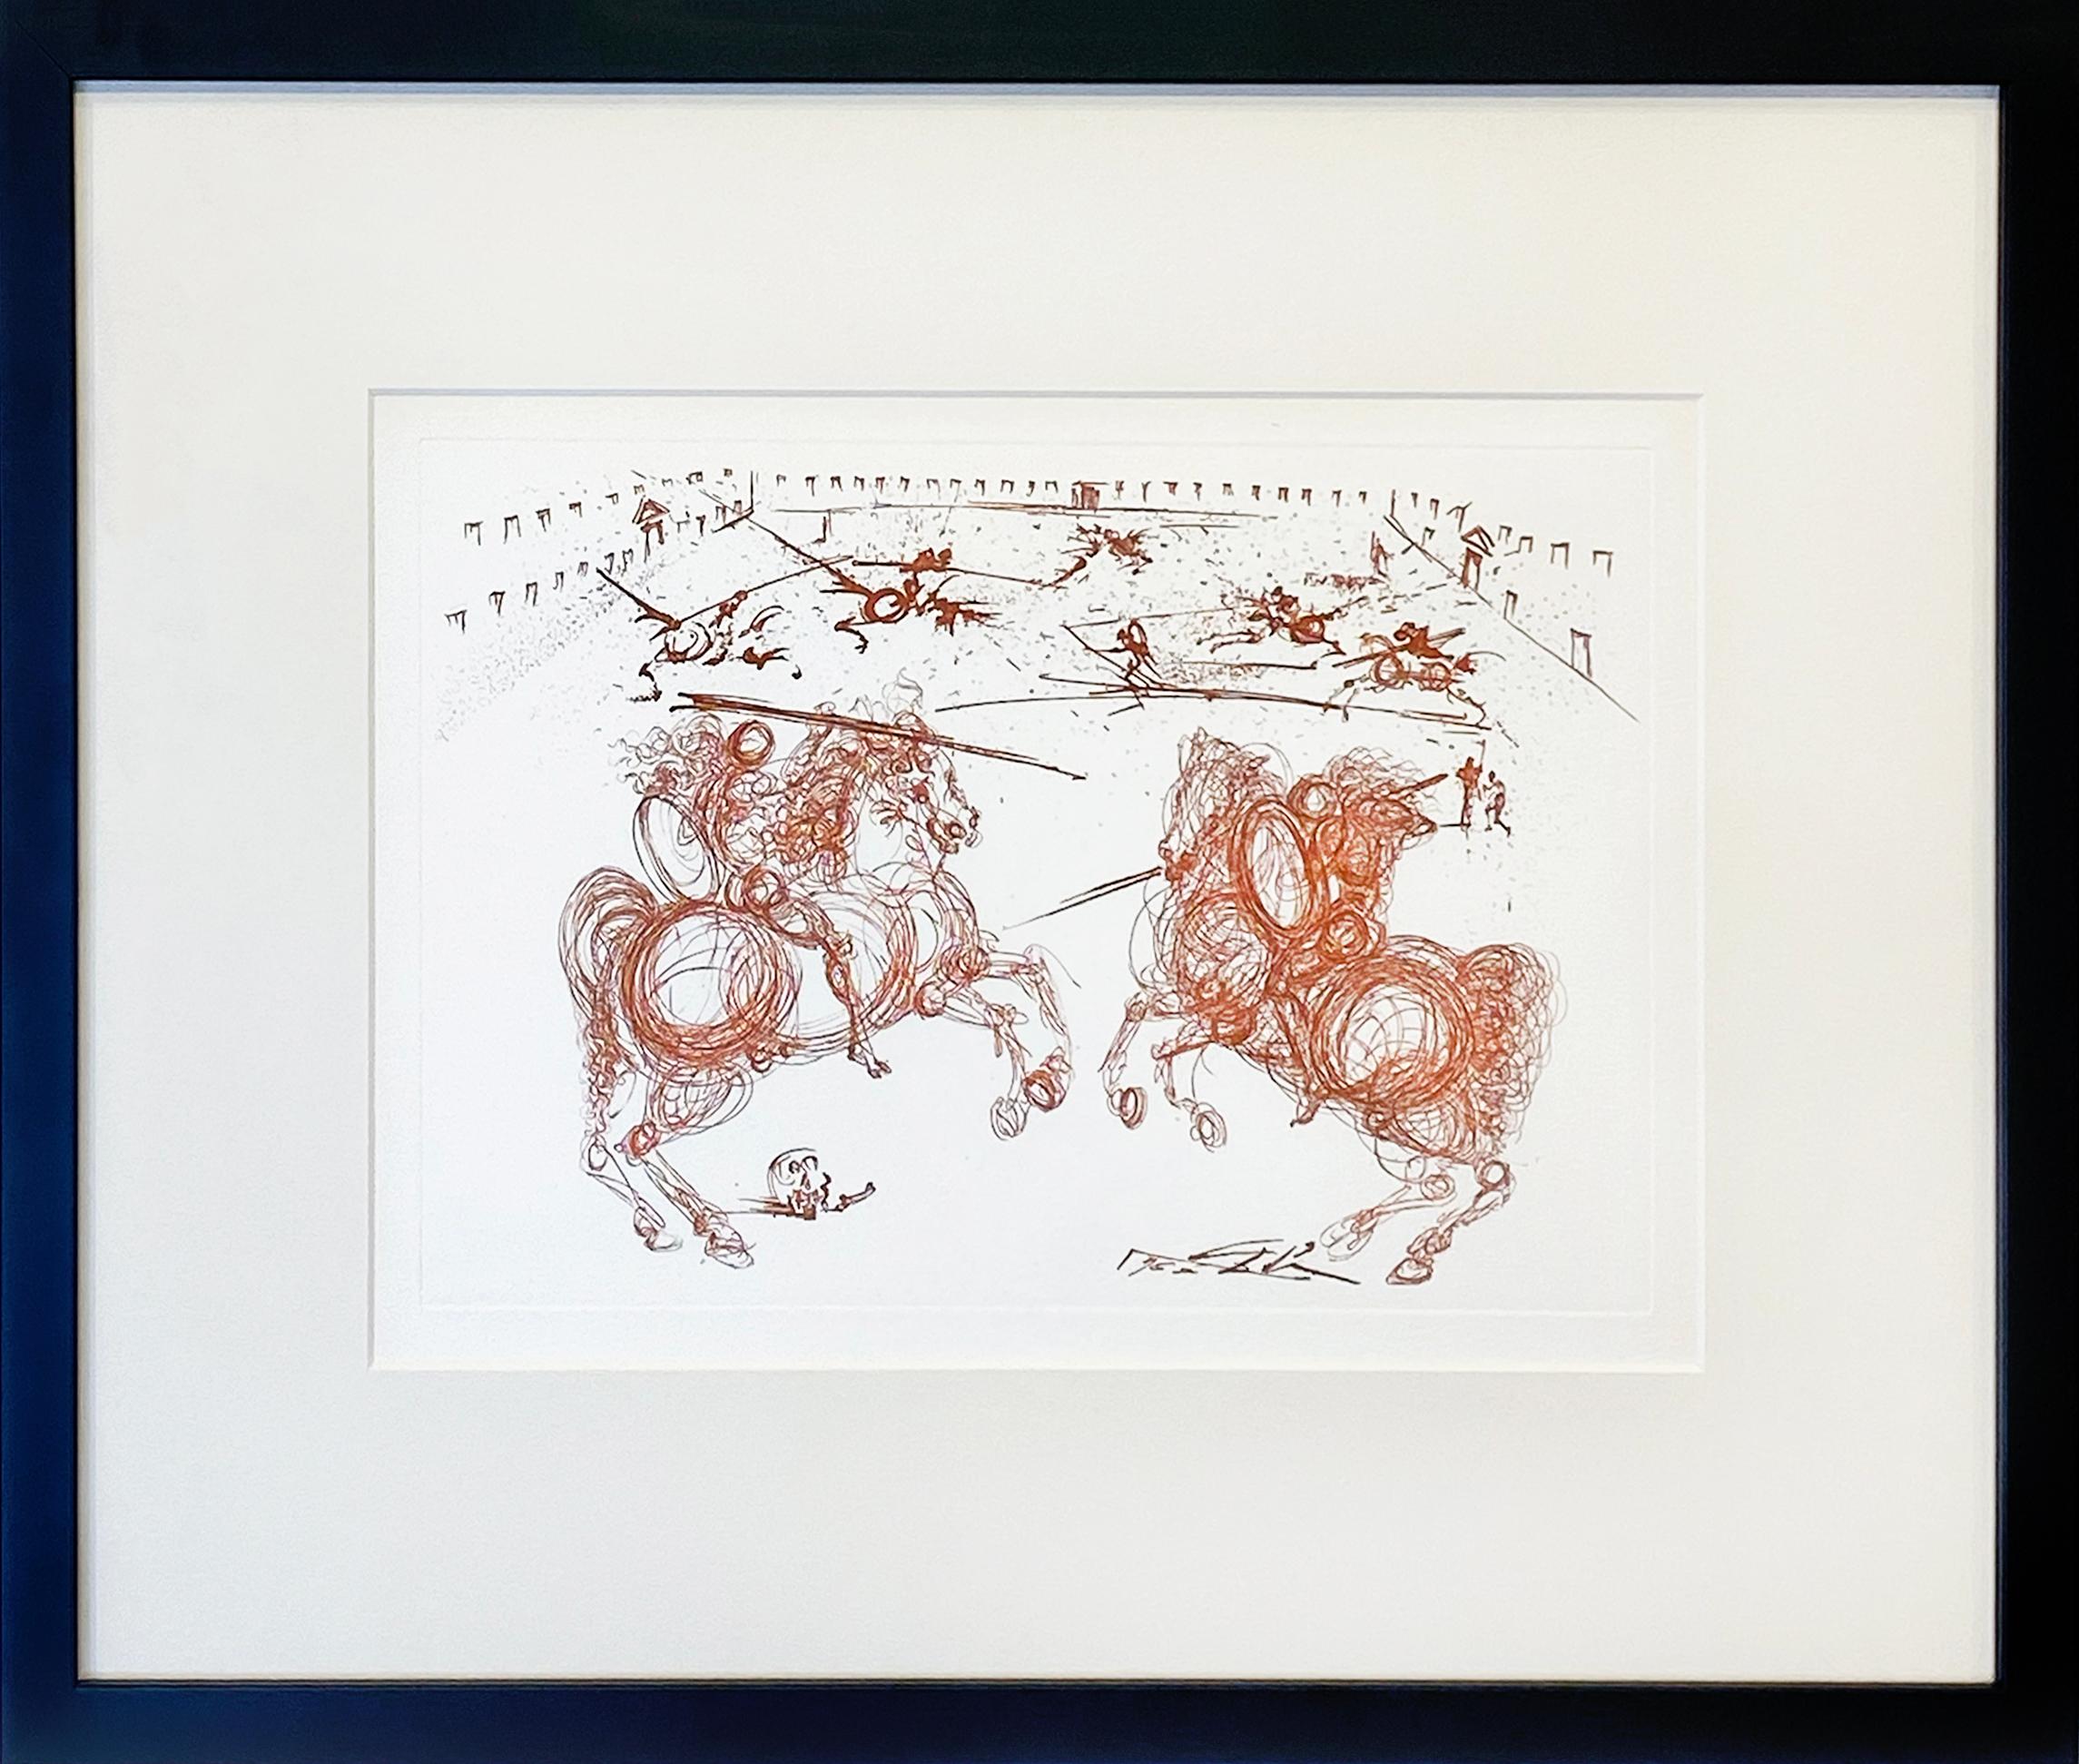 Battle of the Knights - Print by Salvador Dalí